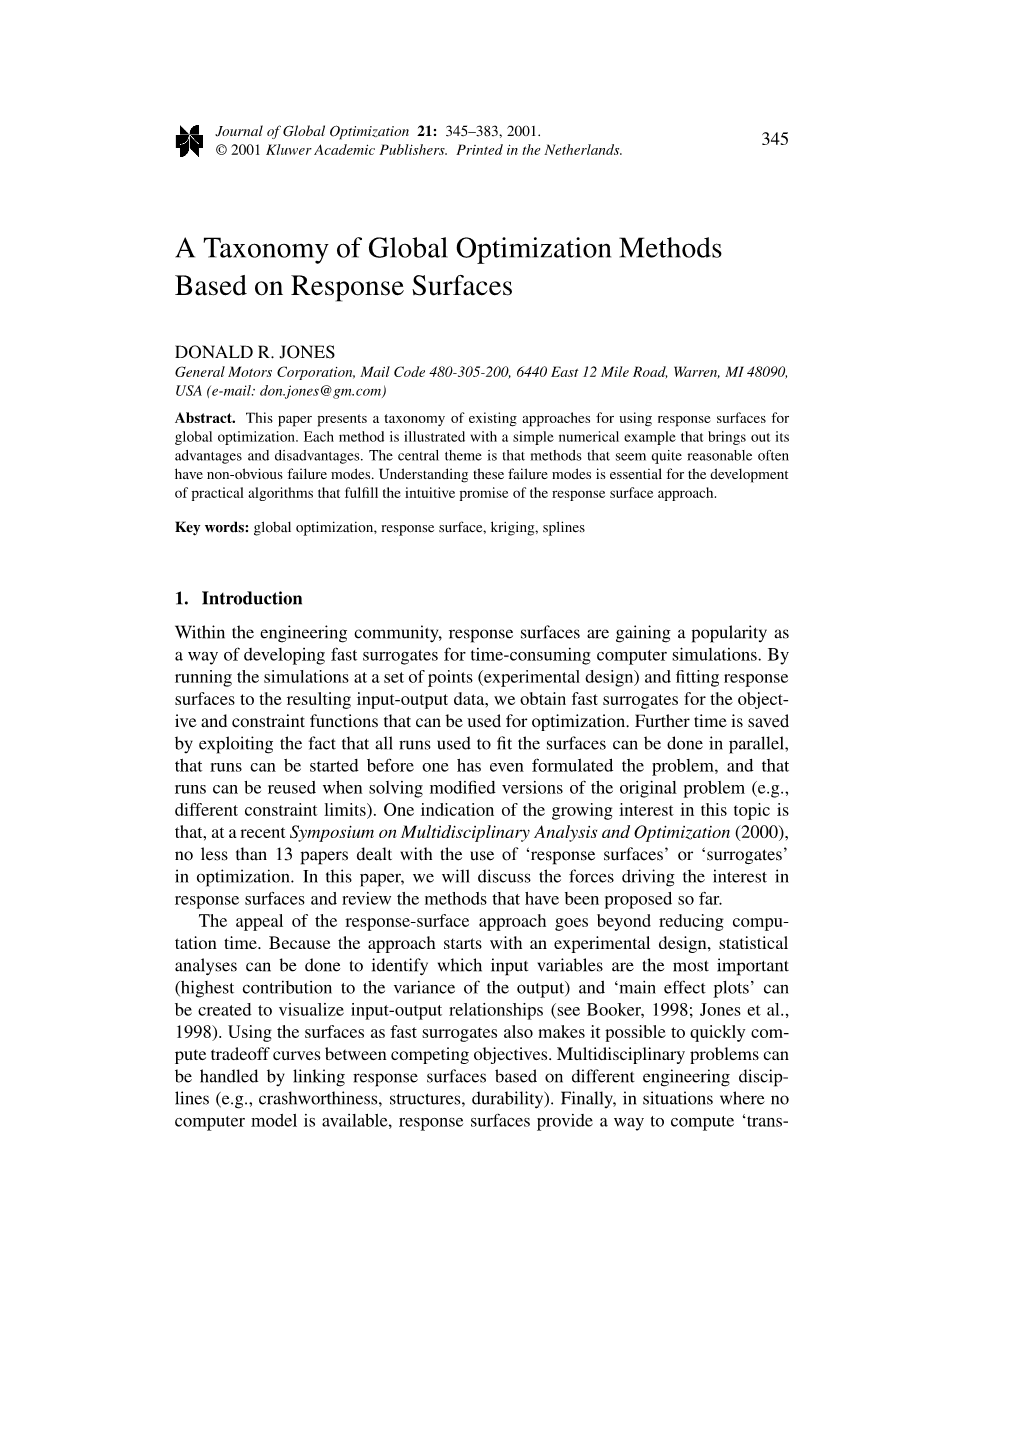 A Taxonomy of Global Optimization Methods Based on Response Surfaces